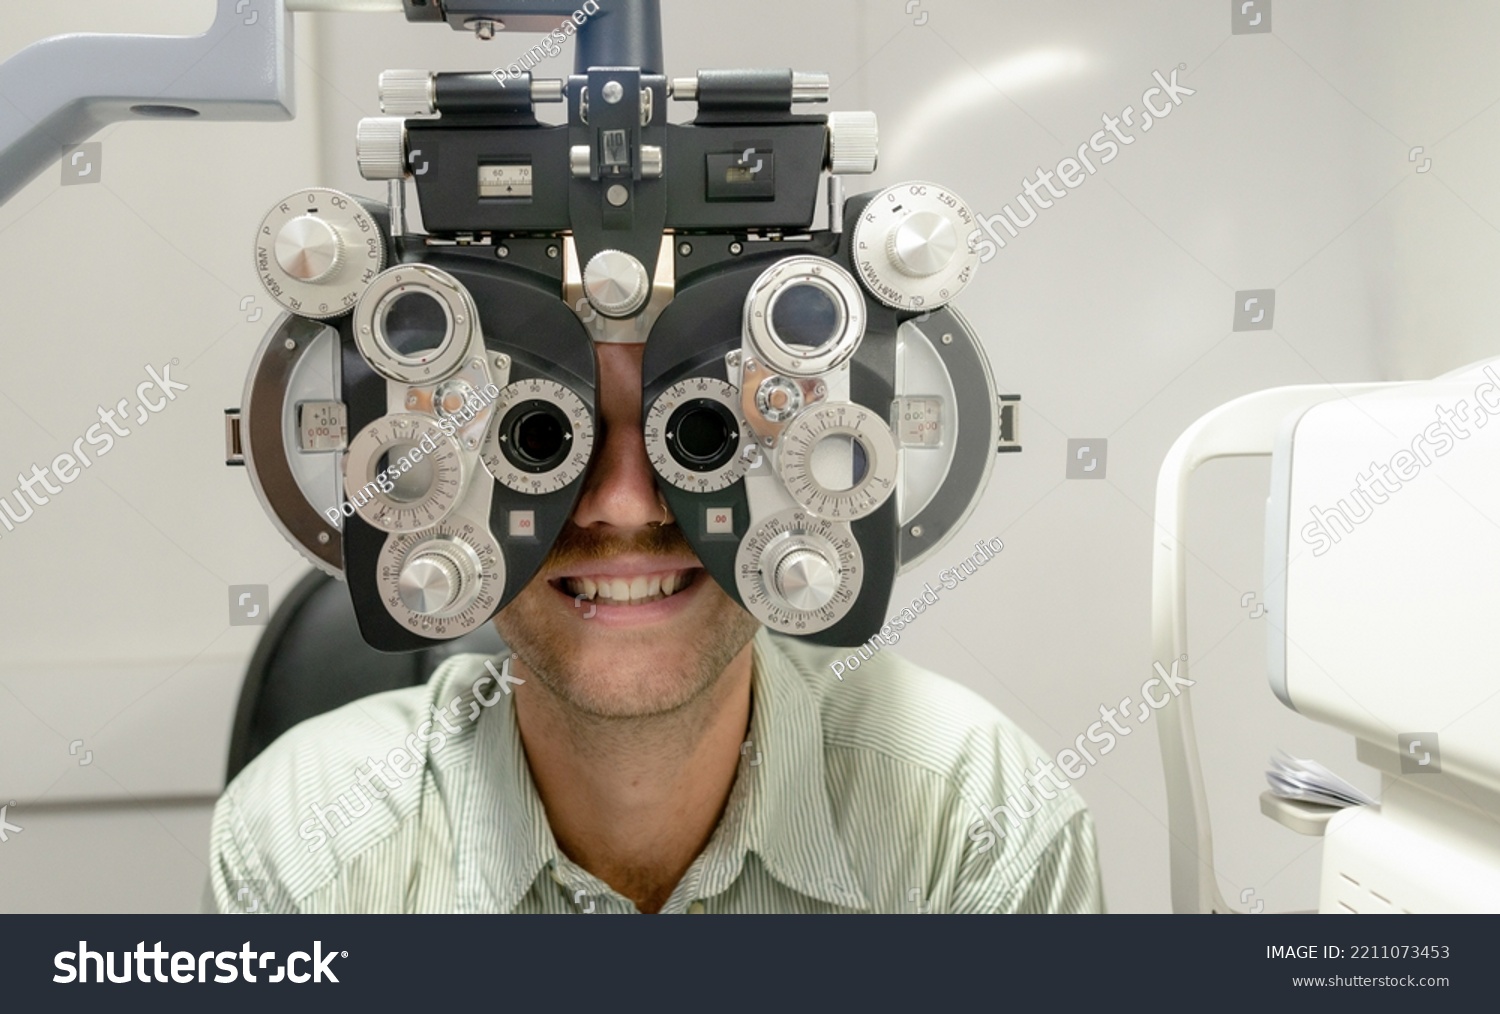 Young man examining eyes with optometrist to make glasses, professional eye exam, close-up shot at optometrist, health concept. #2211073453